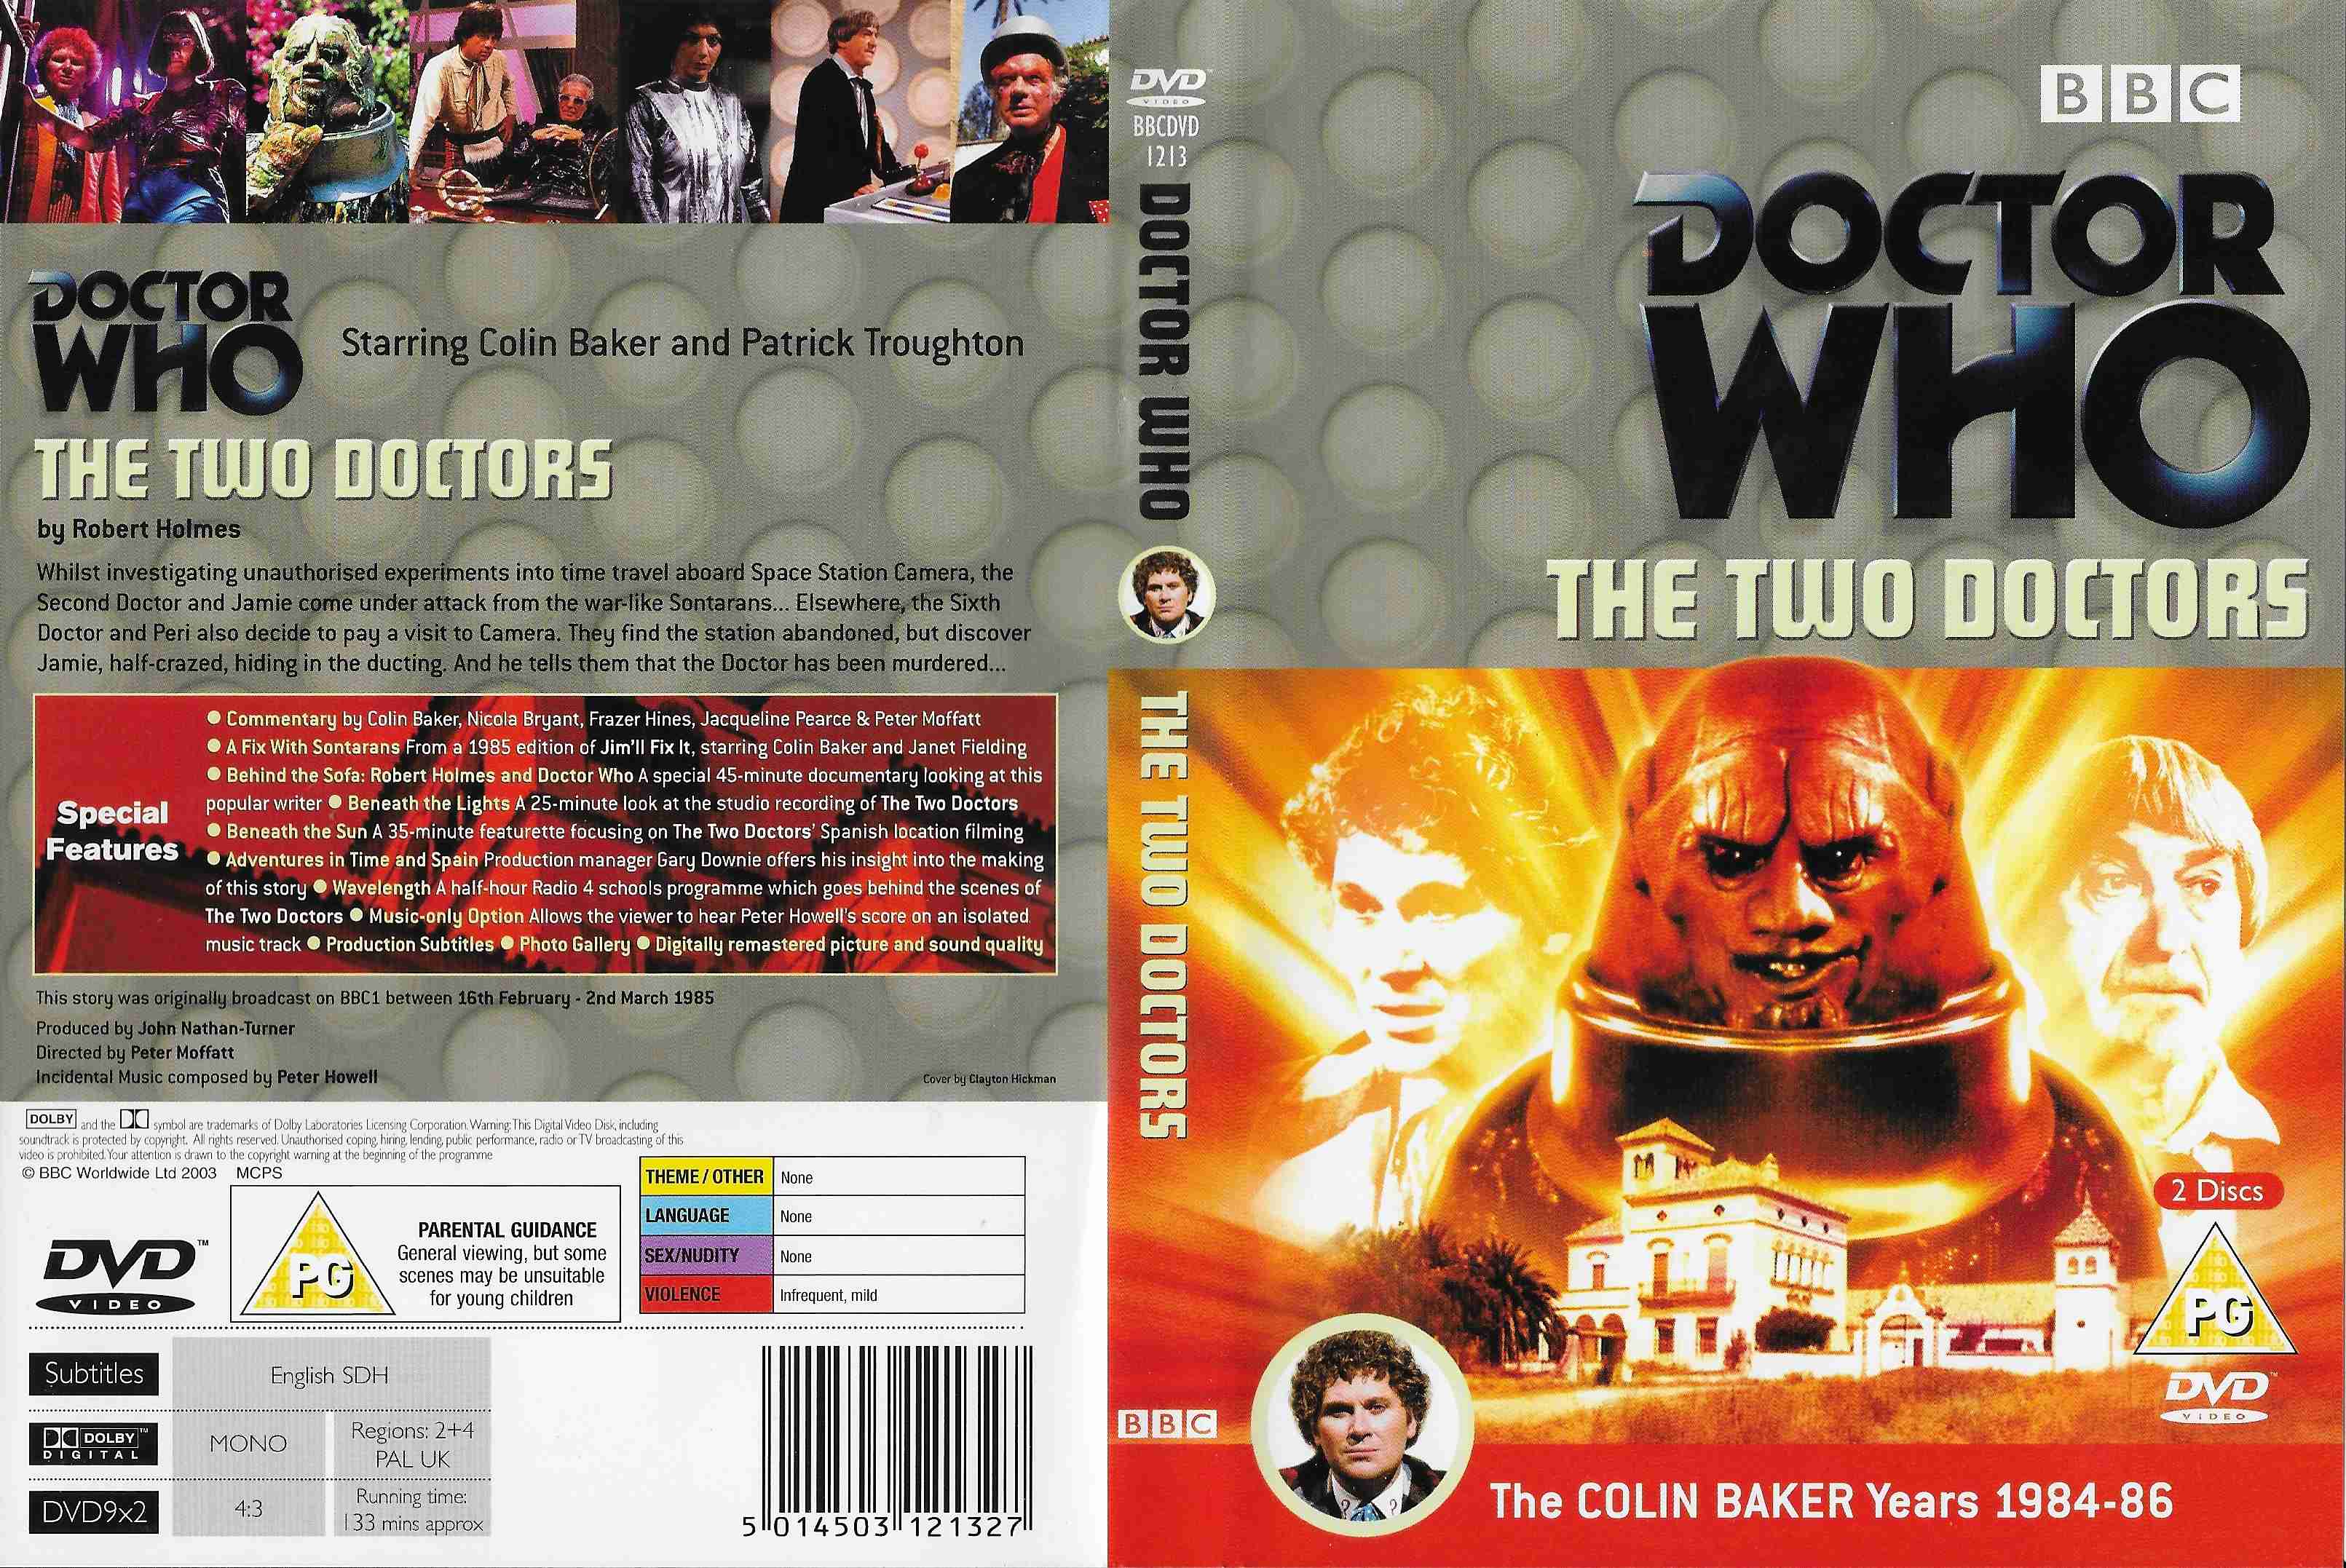 Picture of BBCDVD 1213 Doctor Who - The two doctors by artist Robert Holmes from the BBC records and Tapes library